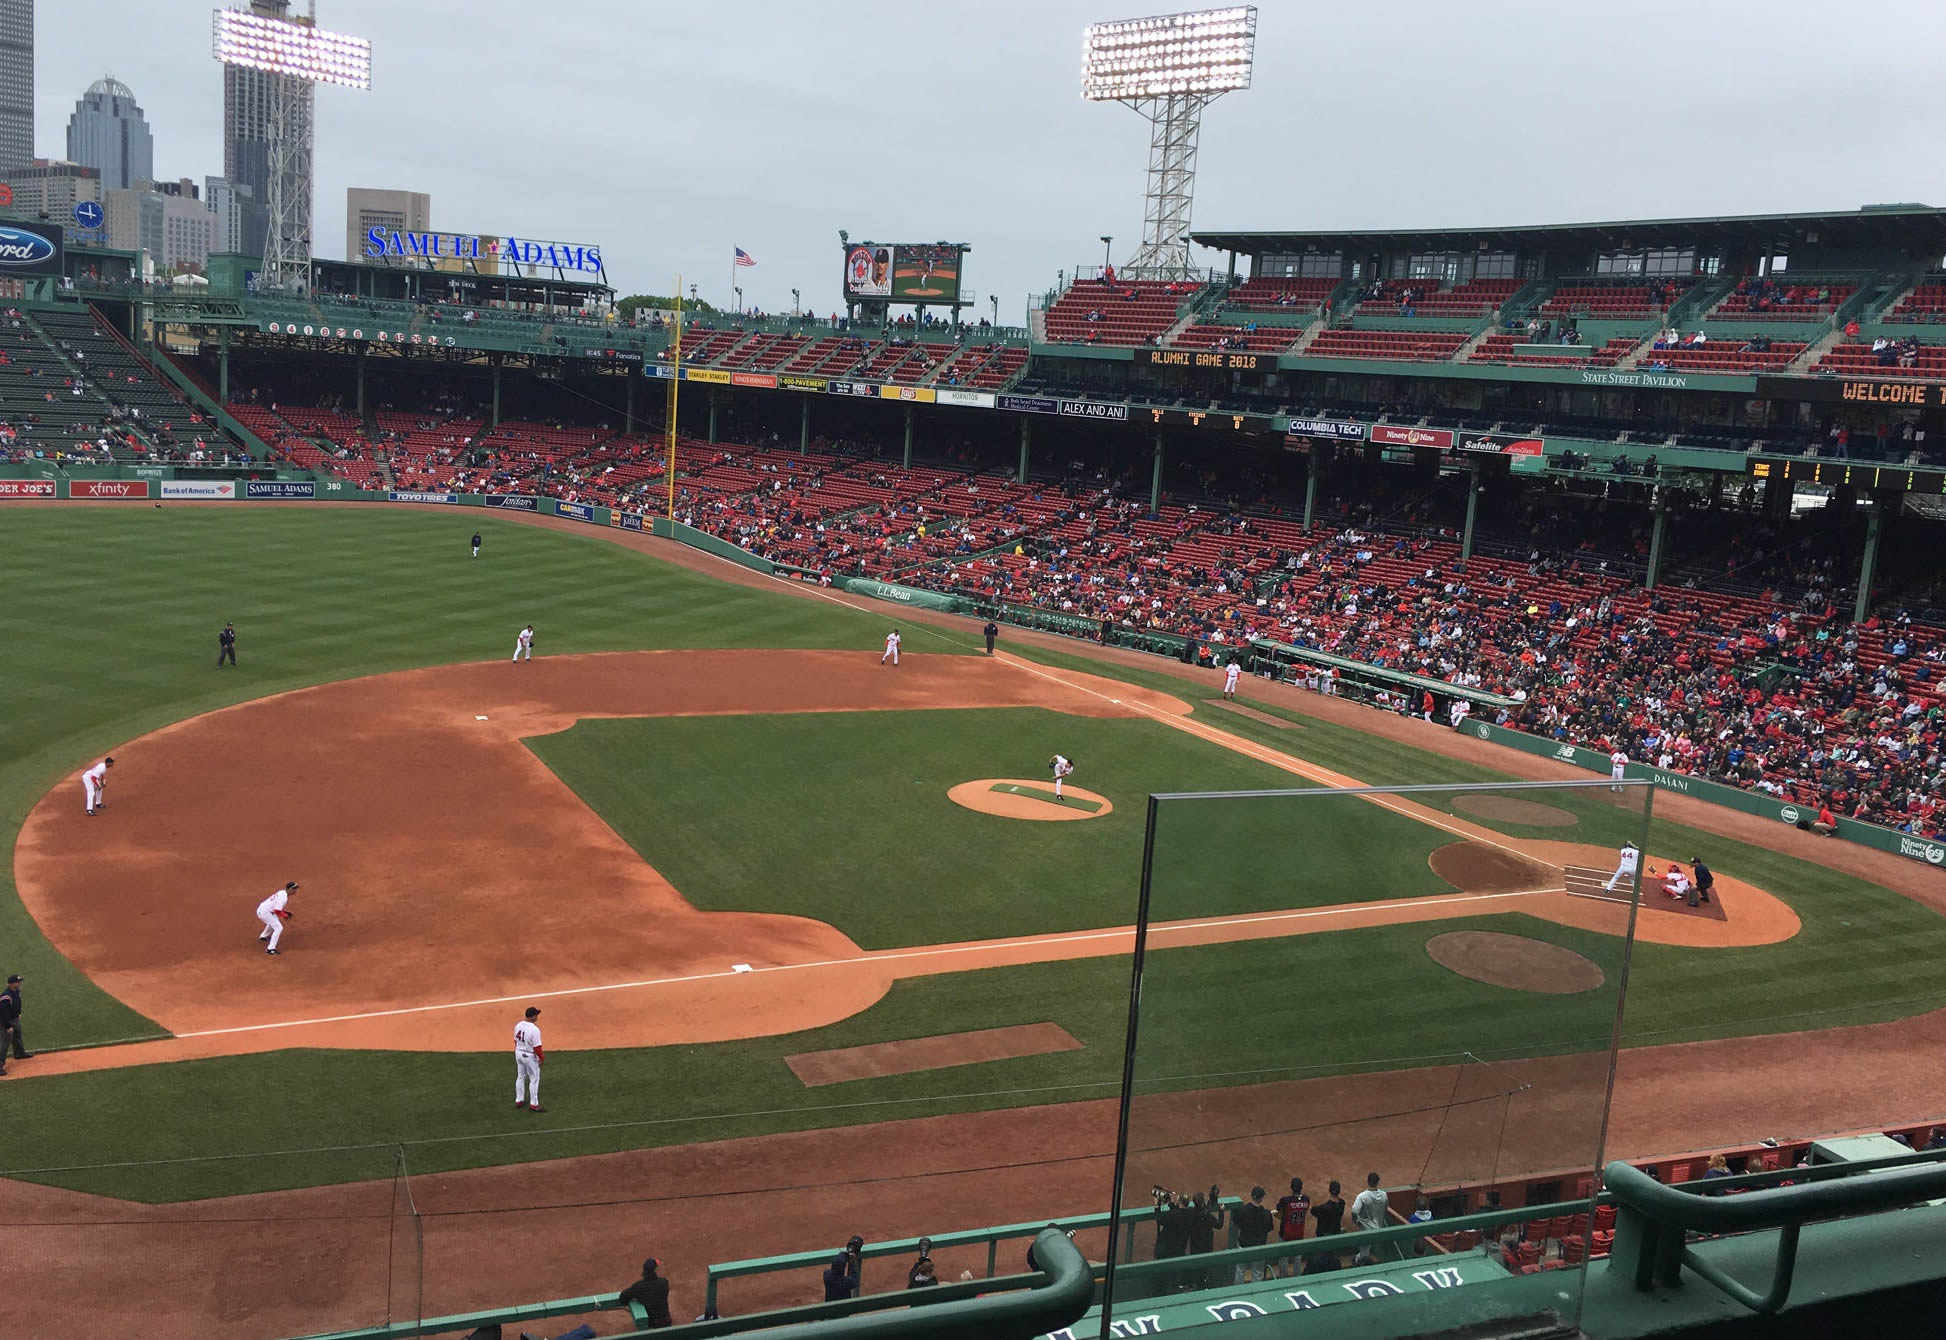 state street pavilion club 10 seat view  for baseball - fenway park